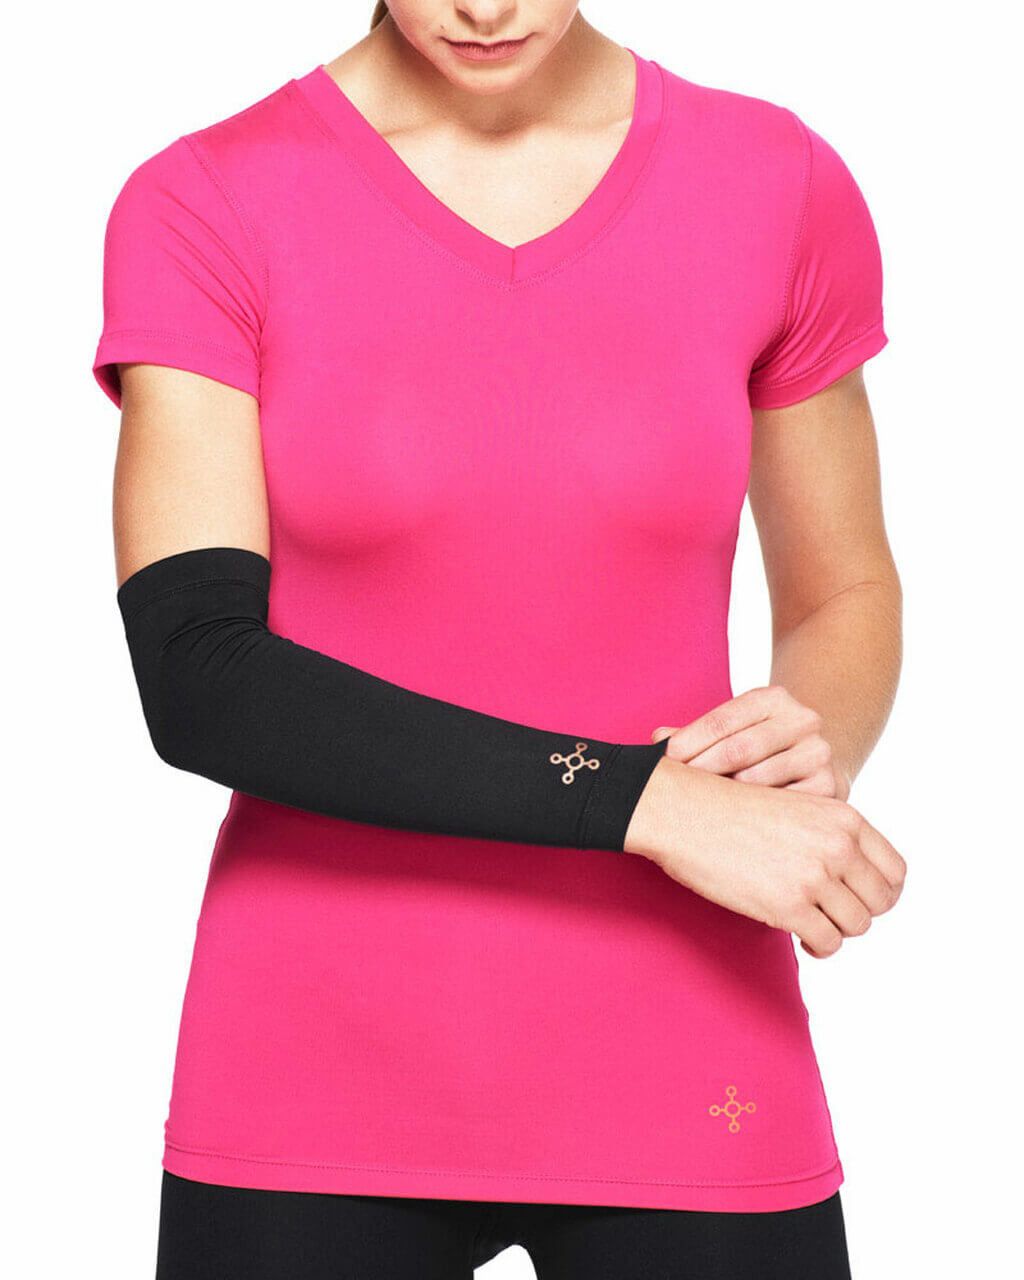 Tommie Copper Compression Arm Sleeve